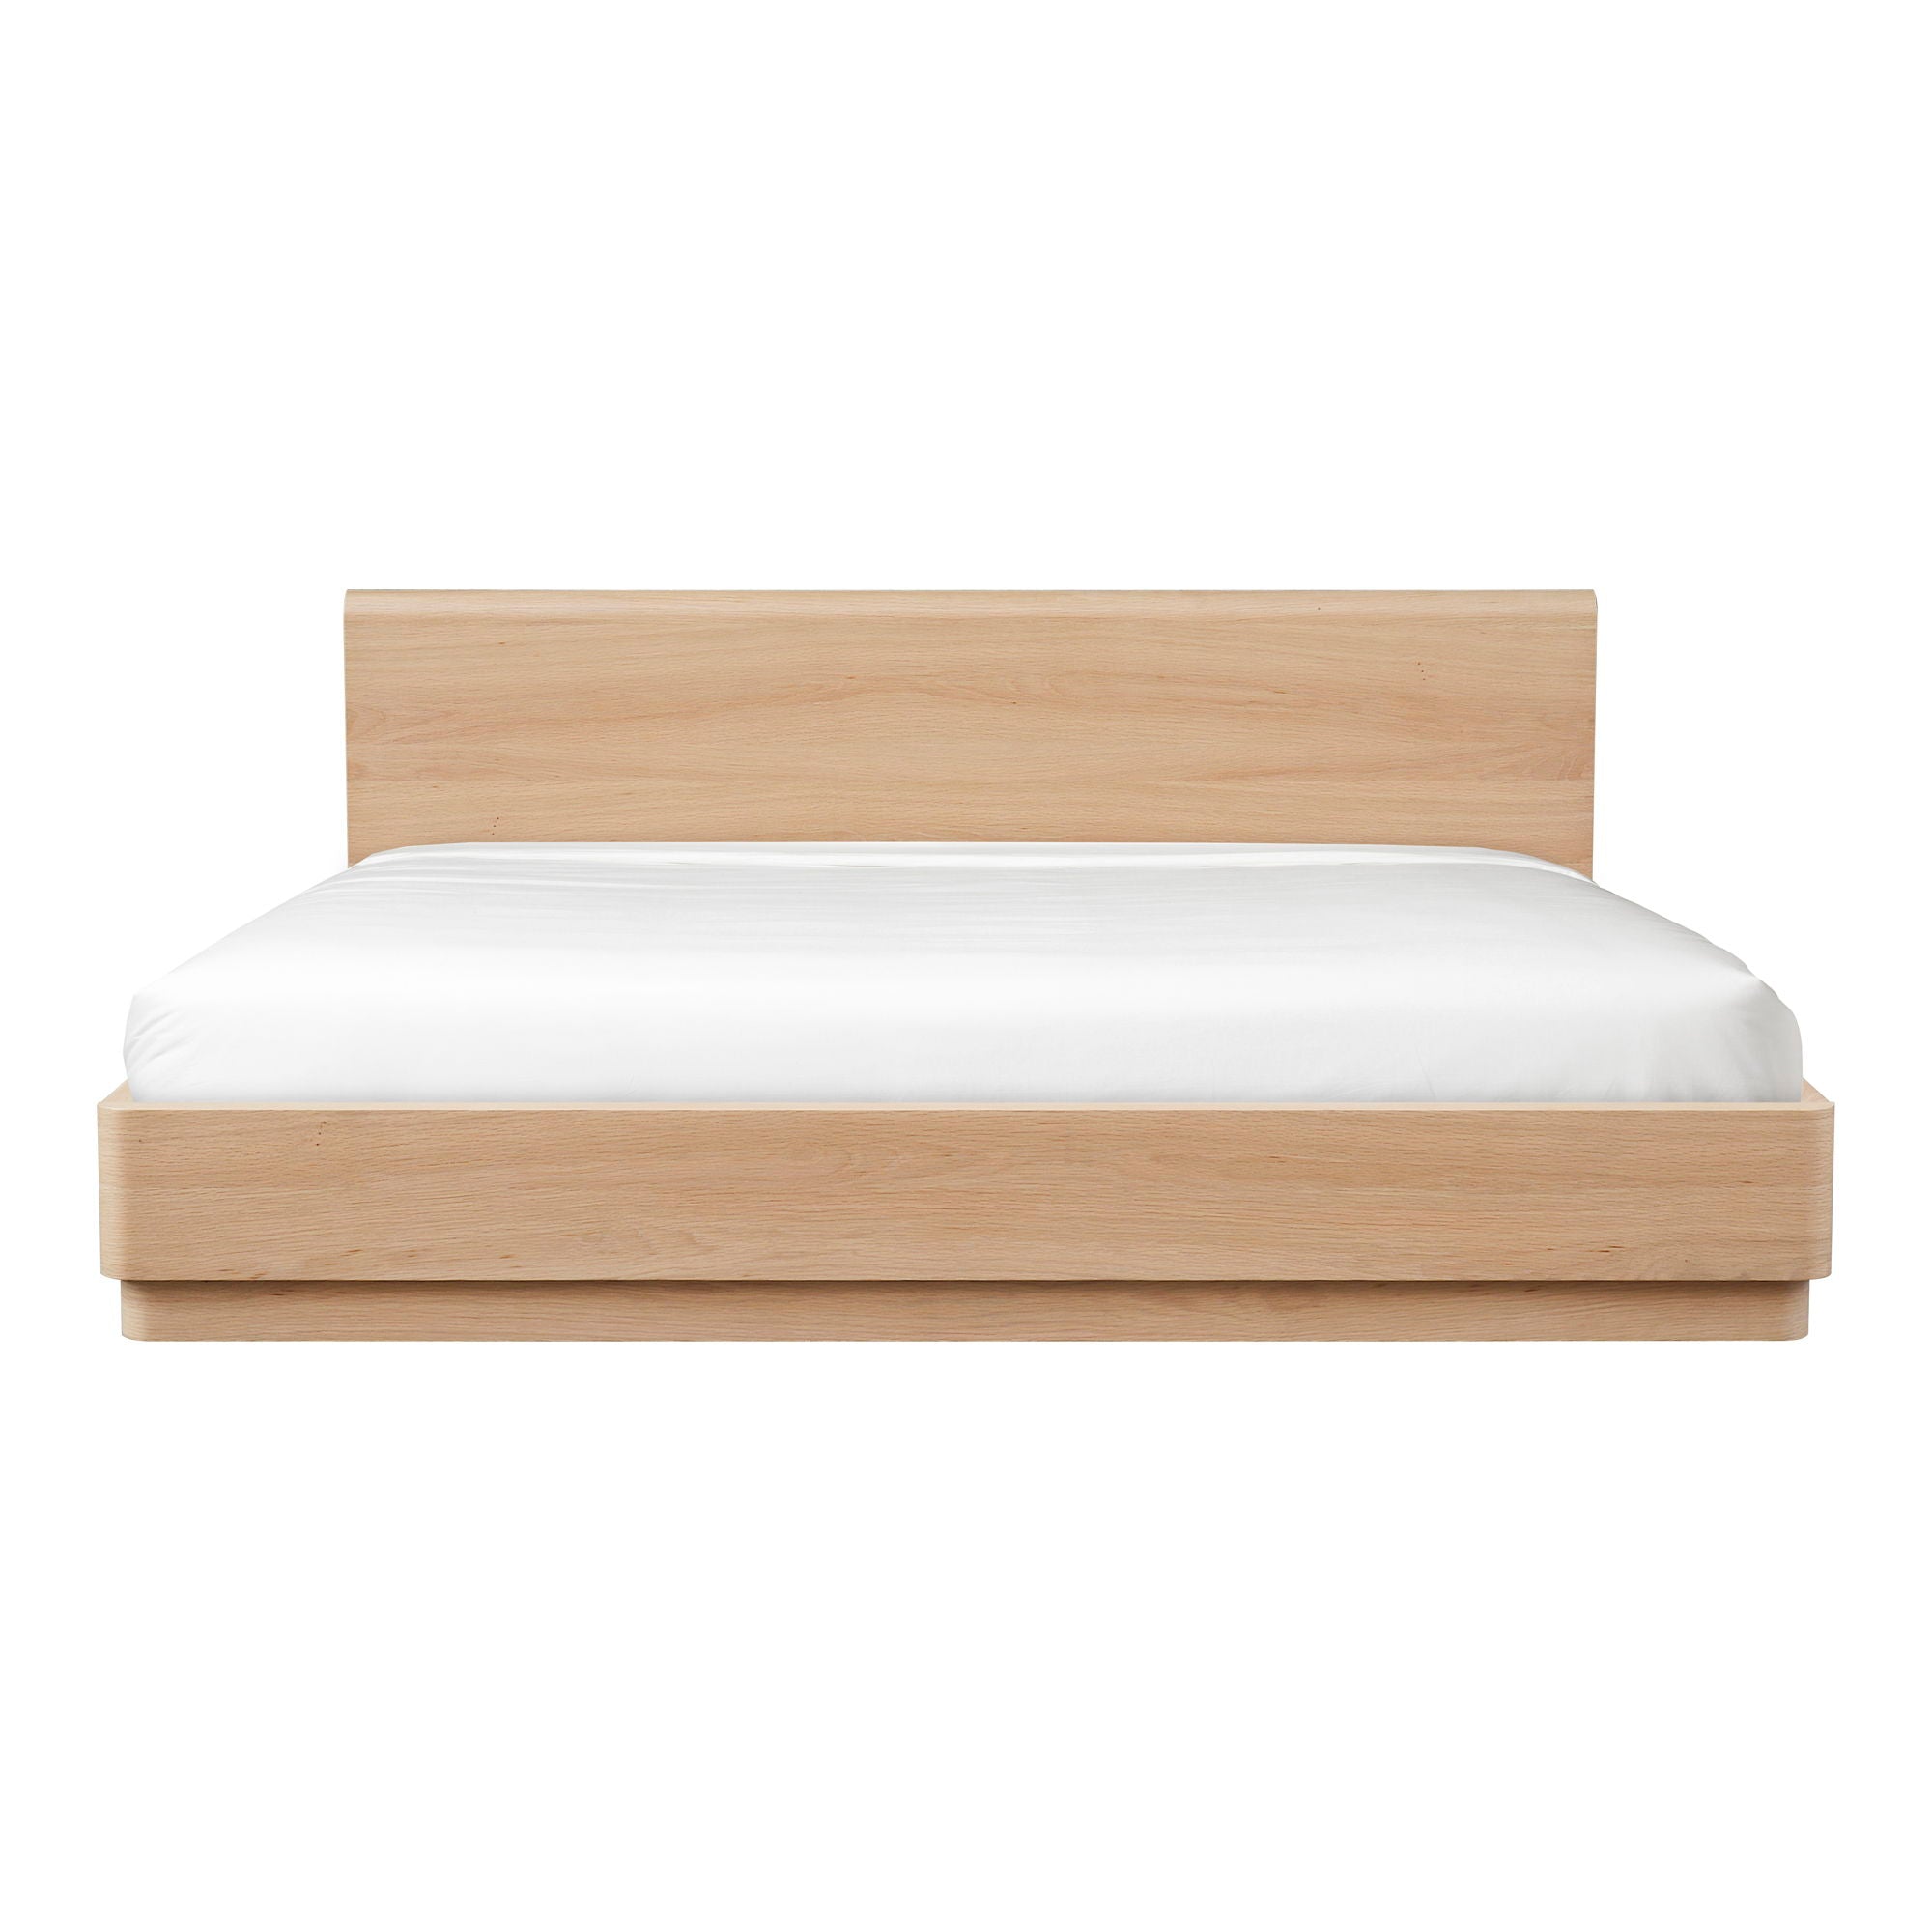 Round Off - Queen Bed - Natural Oak